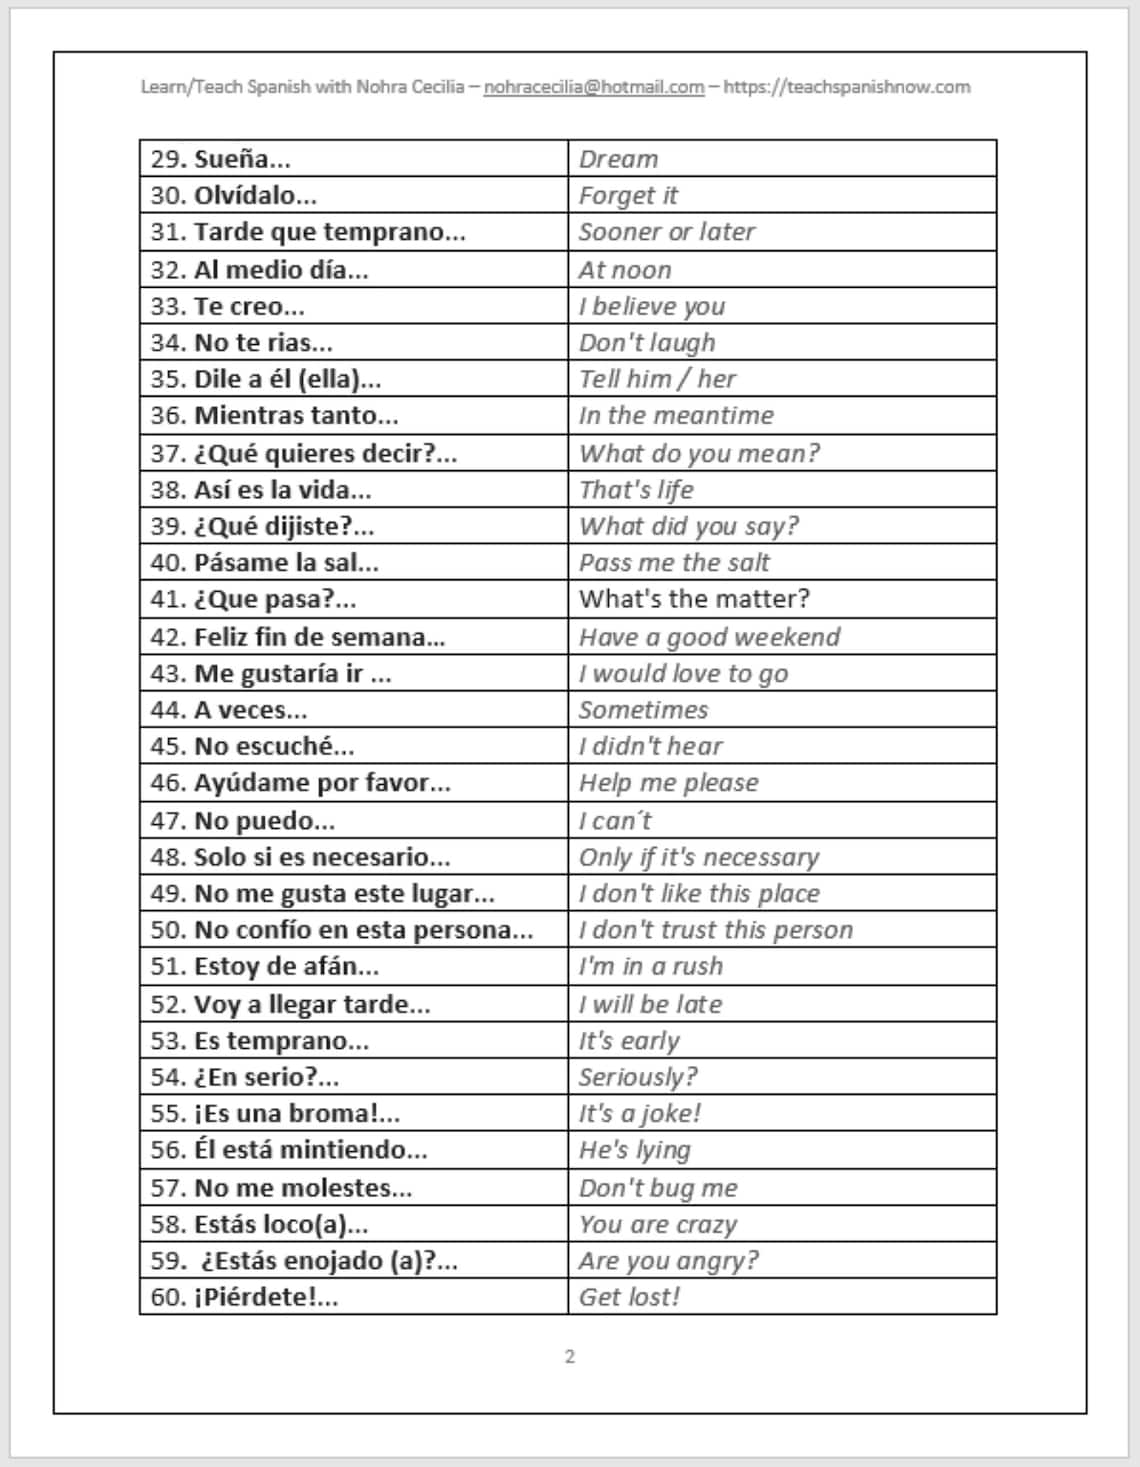 a-printable-list-of-common-phrases-to-use-with-kids-learning-spanish-spanishlessons-learning